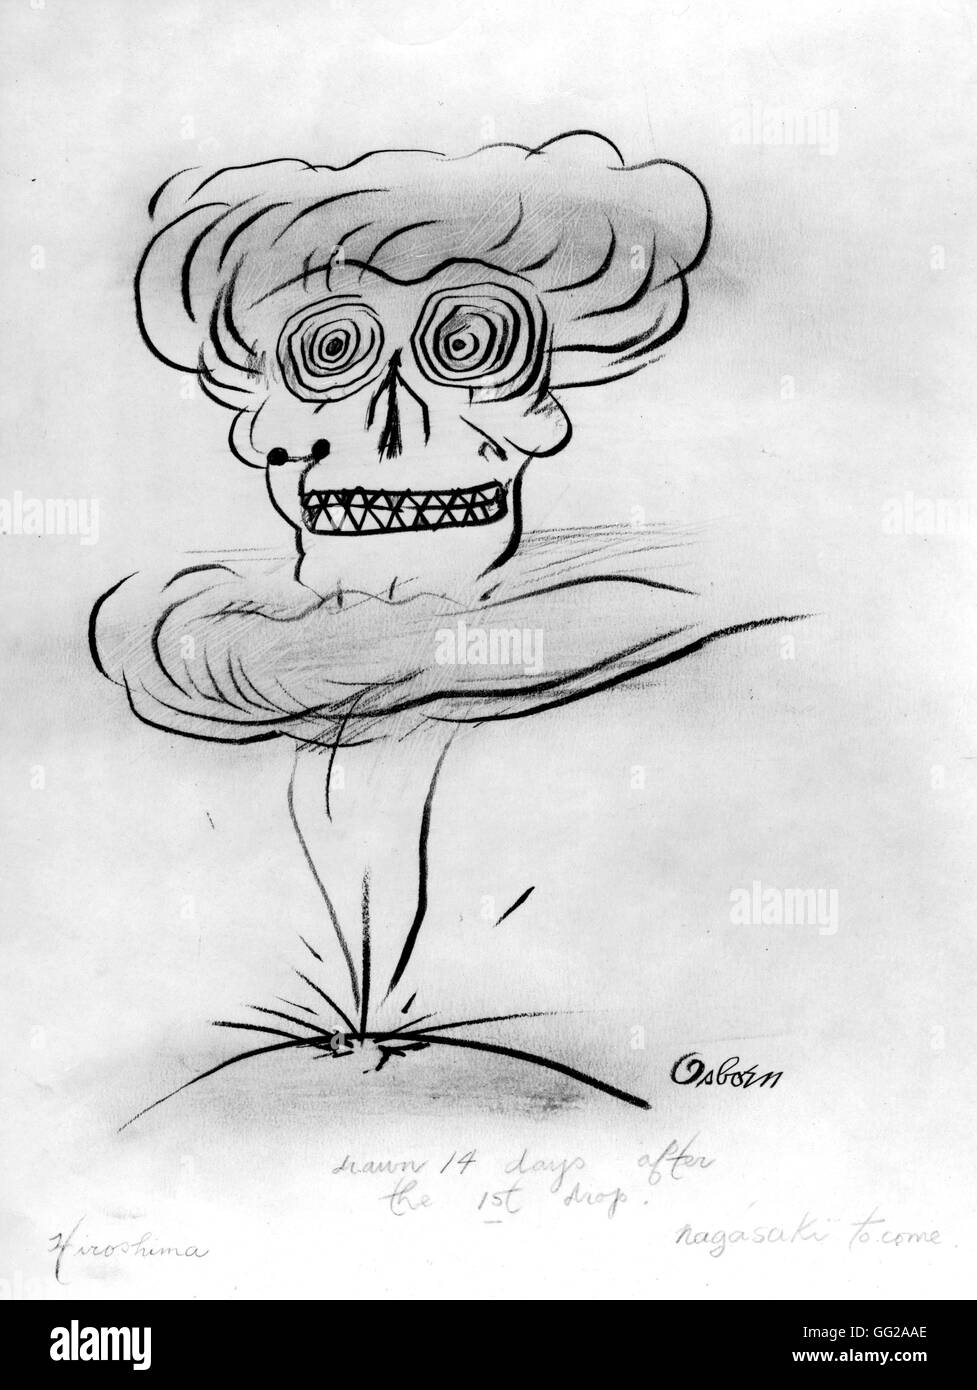 Caricature about the atomic bomb launched on Hiroshima 20th century Japan - World War II Washington. Library of Congress Stock Photo